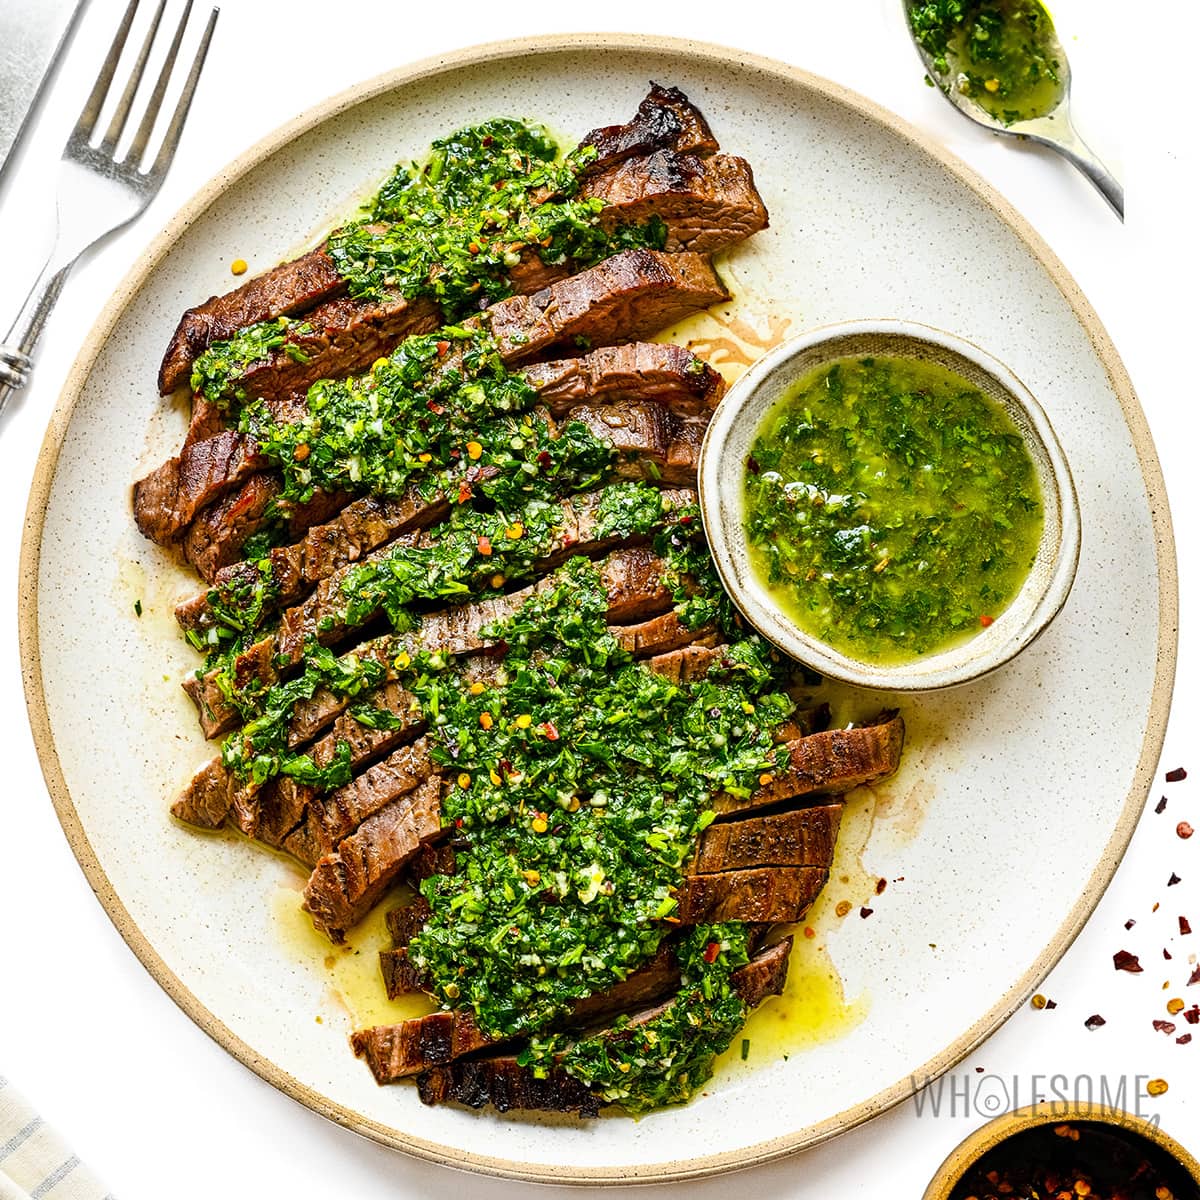 Sliced flank steak with chimichurri sauce on a plate.